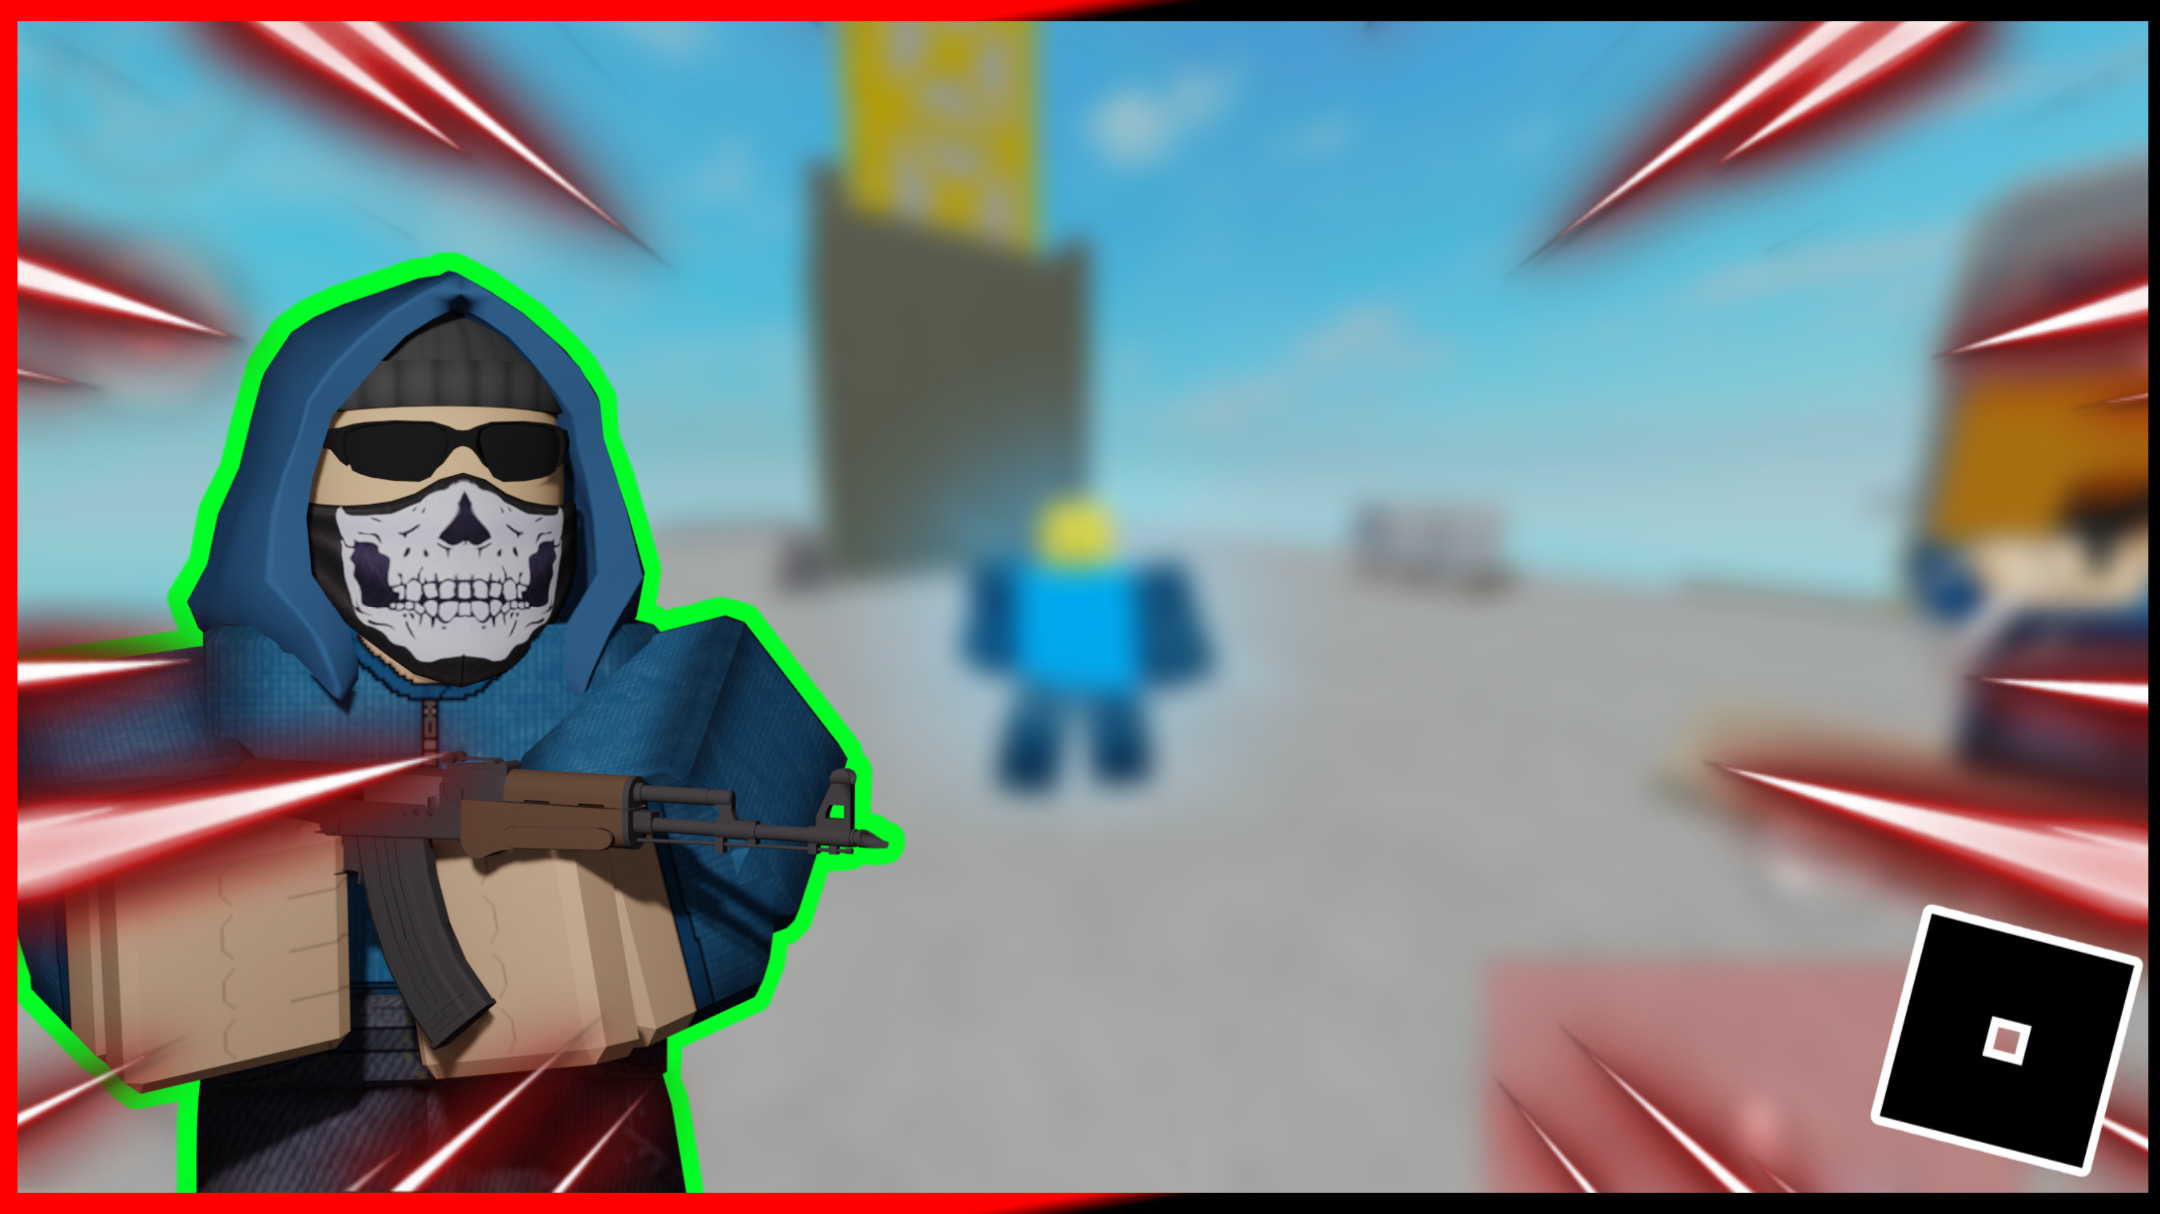 Thumbnail Roblox Arsenal Thumbnail Image By Glitch - how to make a thumbnail in roblox